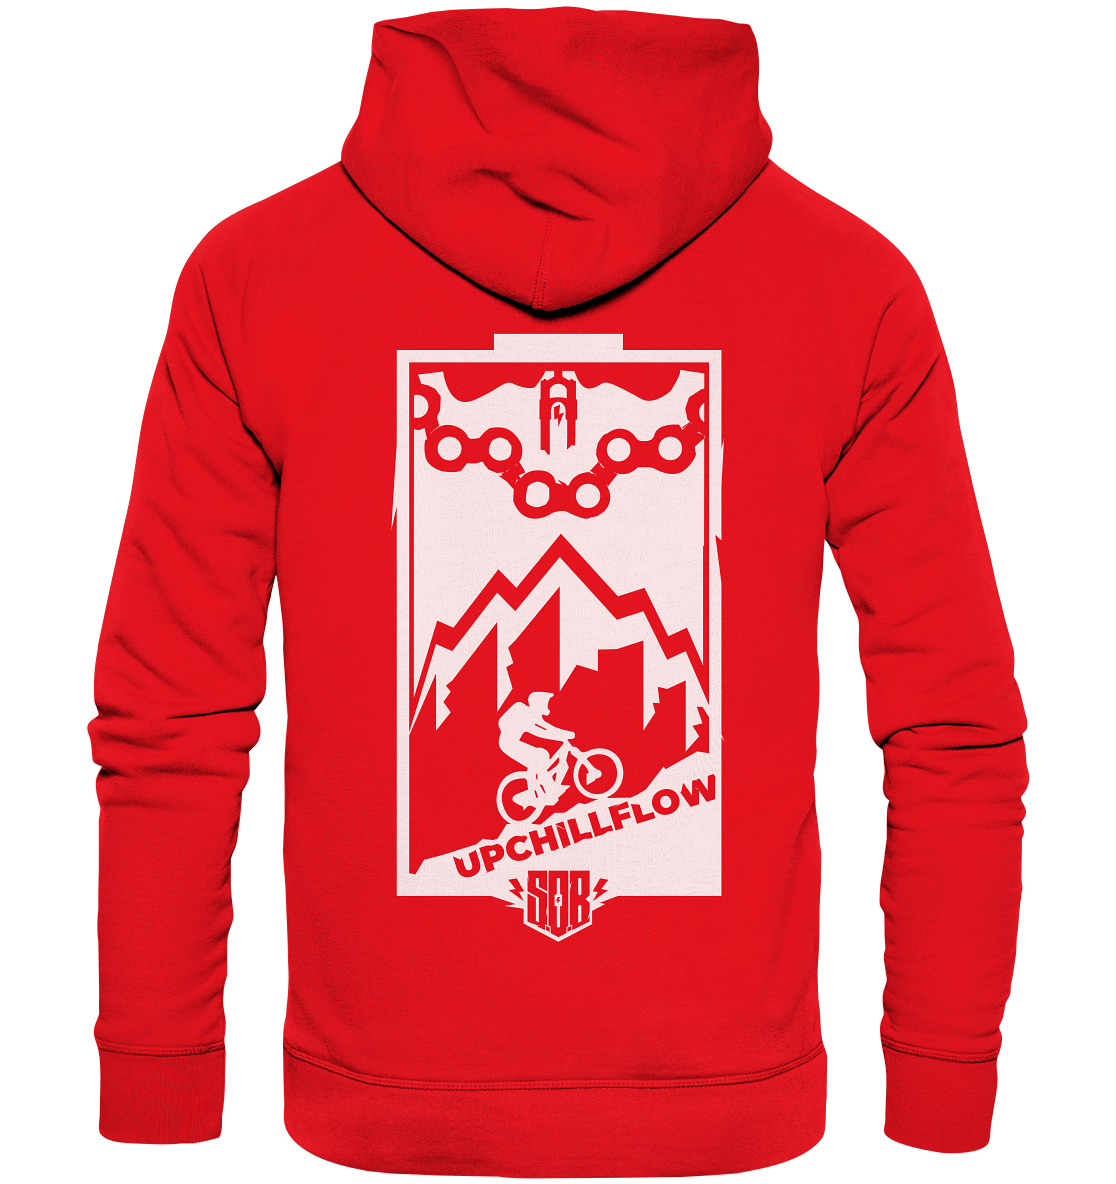 Sons of Battery® - E-MTB Brand & Community Hoodies Bright Red / XS Sons of Battery - Upchillflow - Organic Hoodie E-Bike-Community